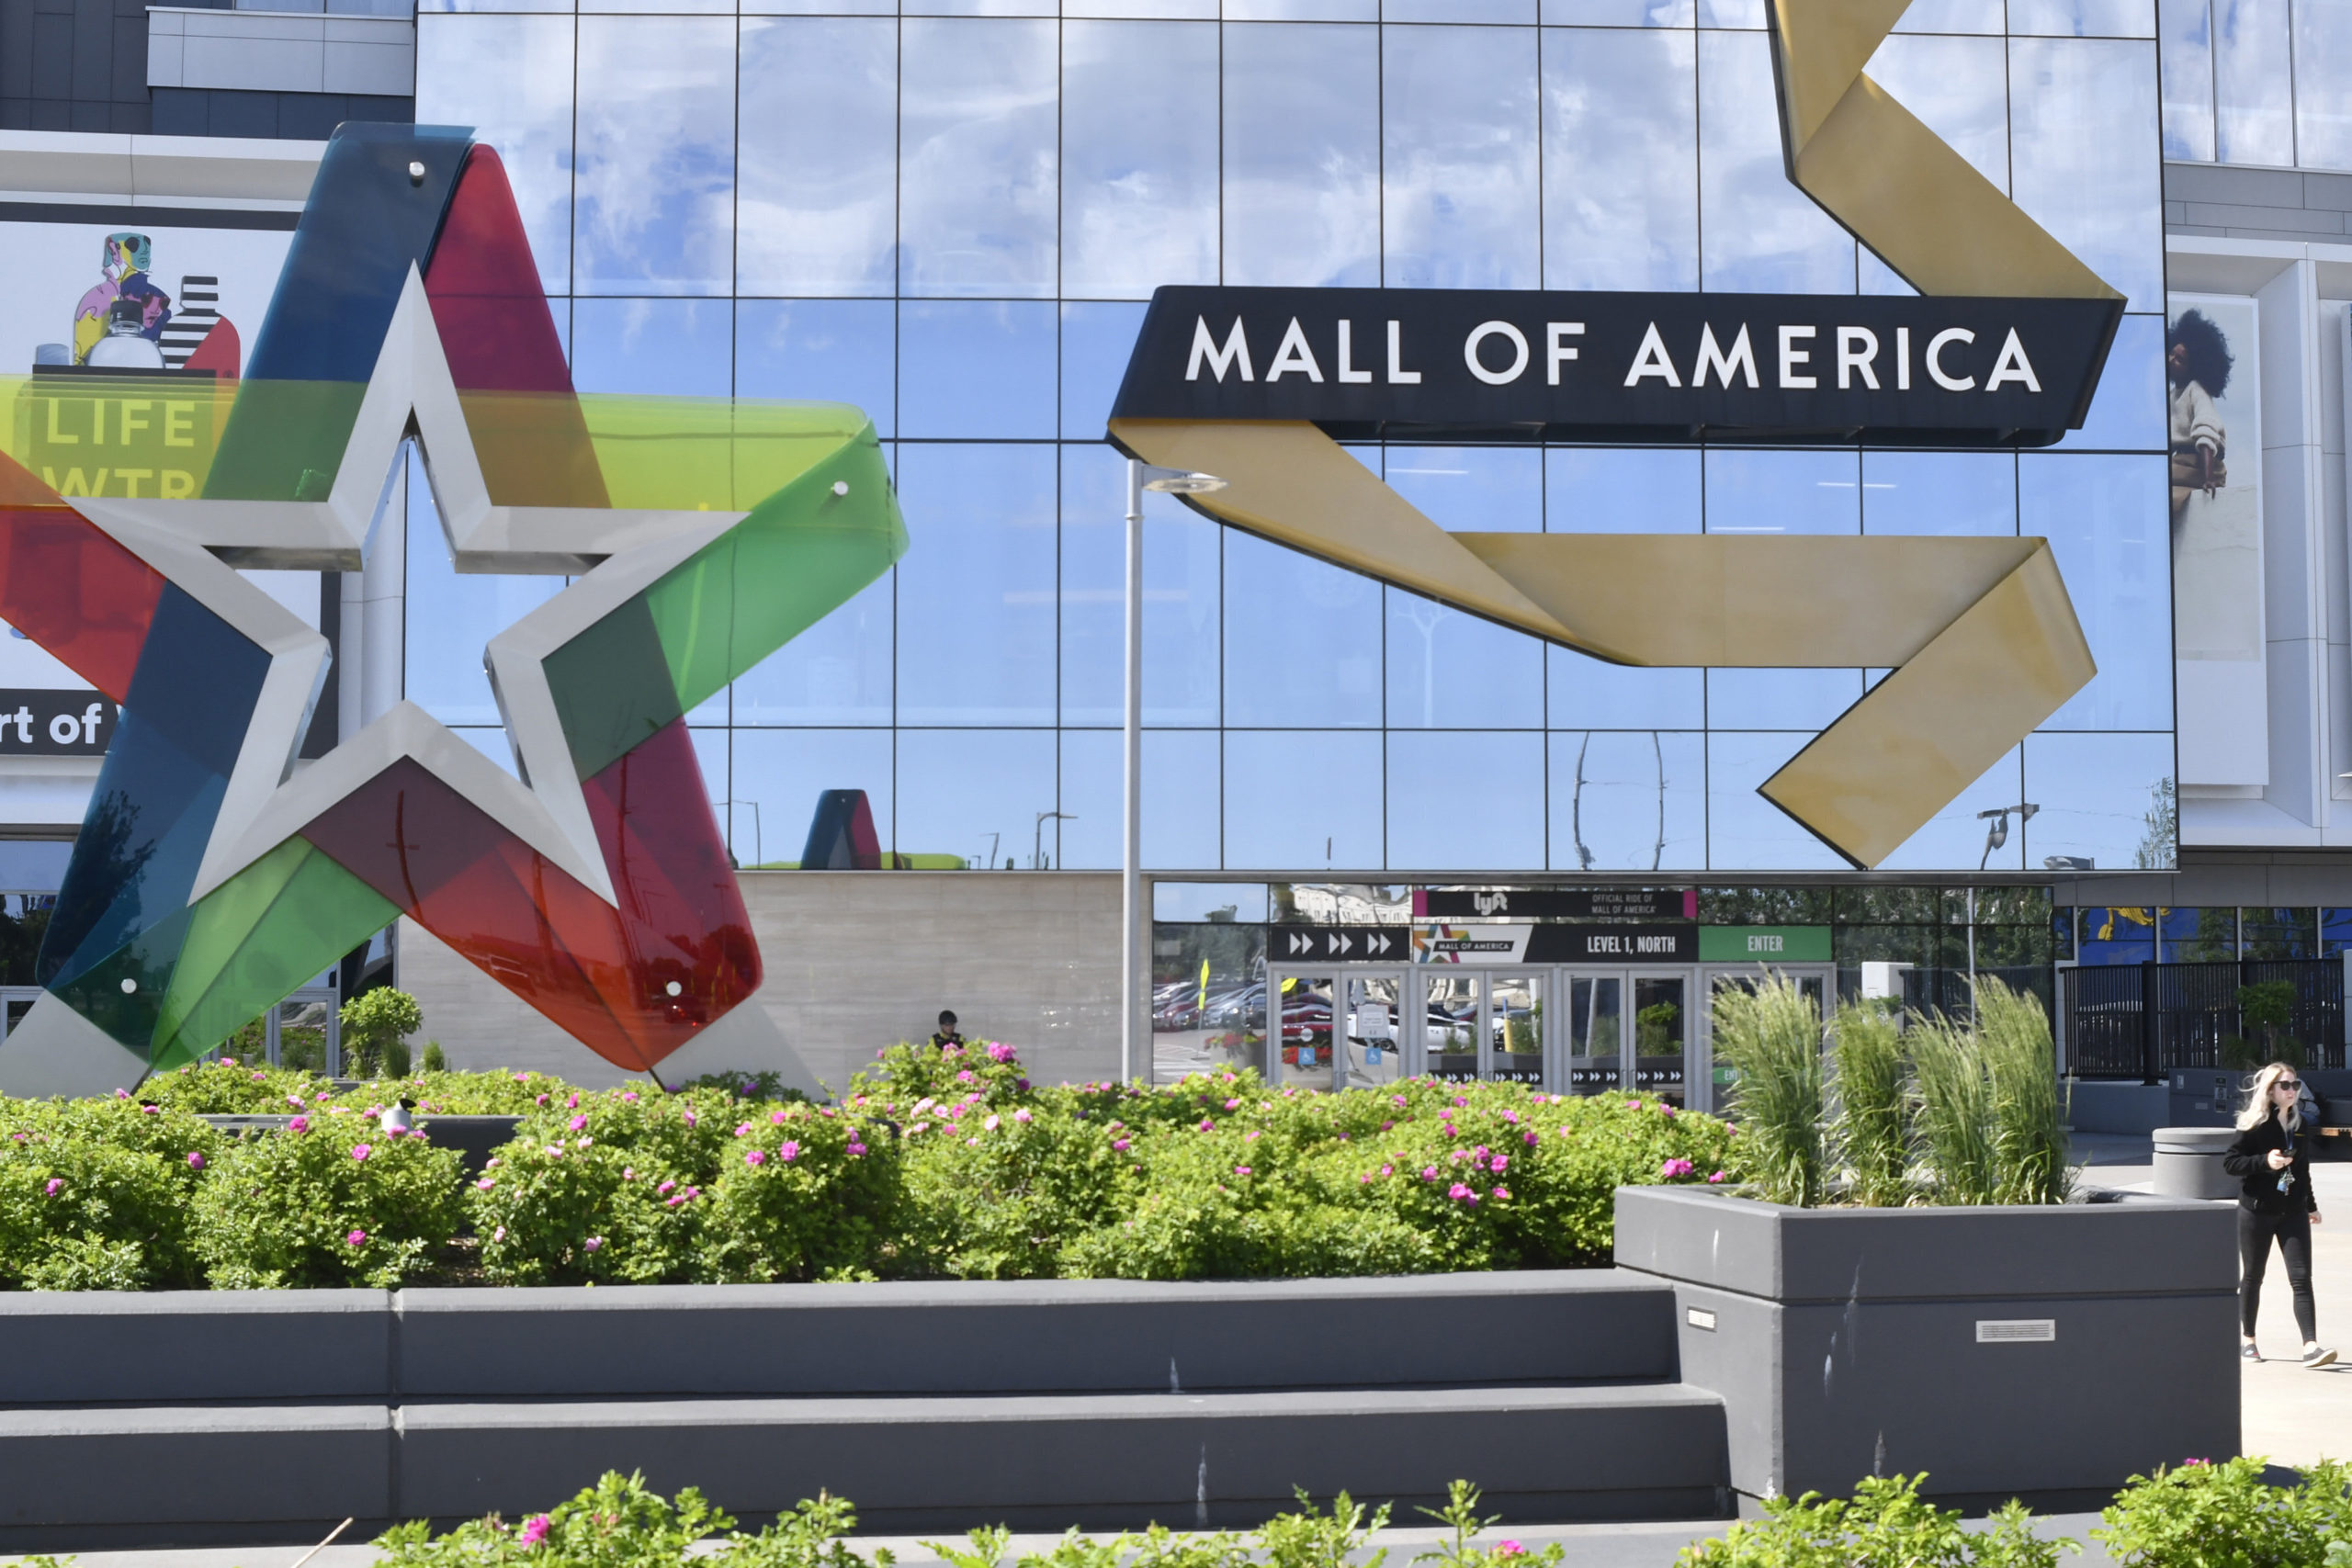 A shopper leaves the Mall of America in Bloomington, Minnesota, on June 11, 2020. On Friday the mall went into lockdown after a shooting.